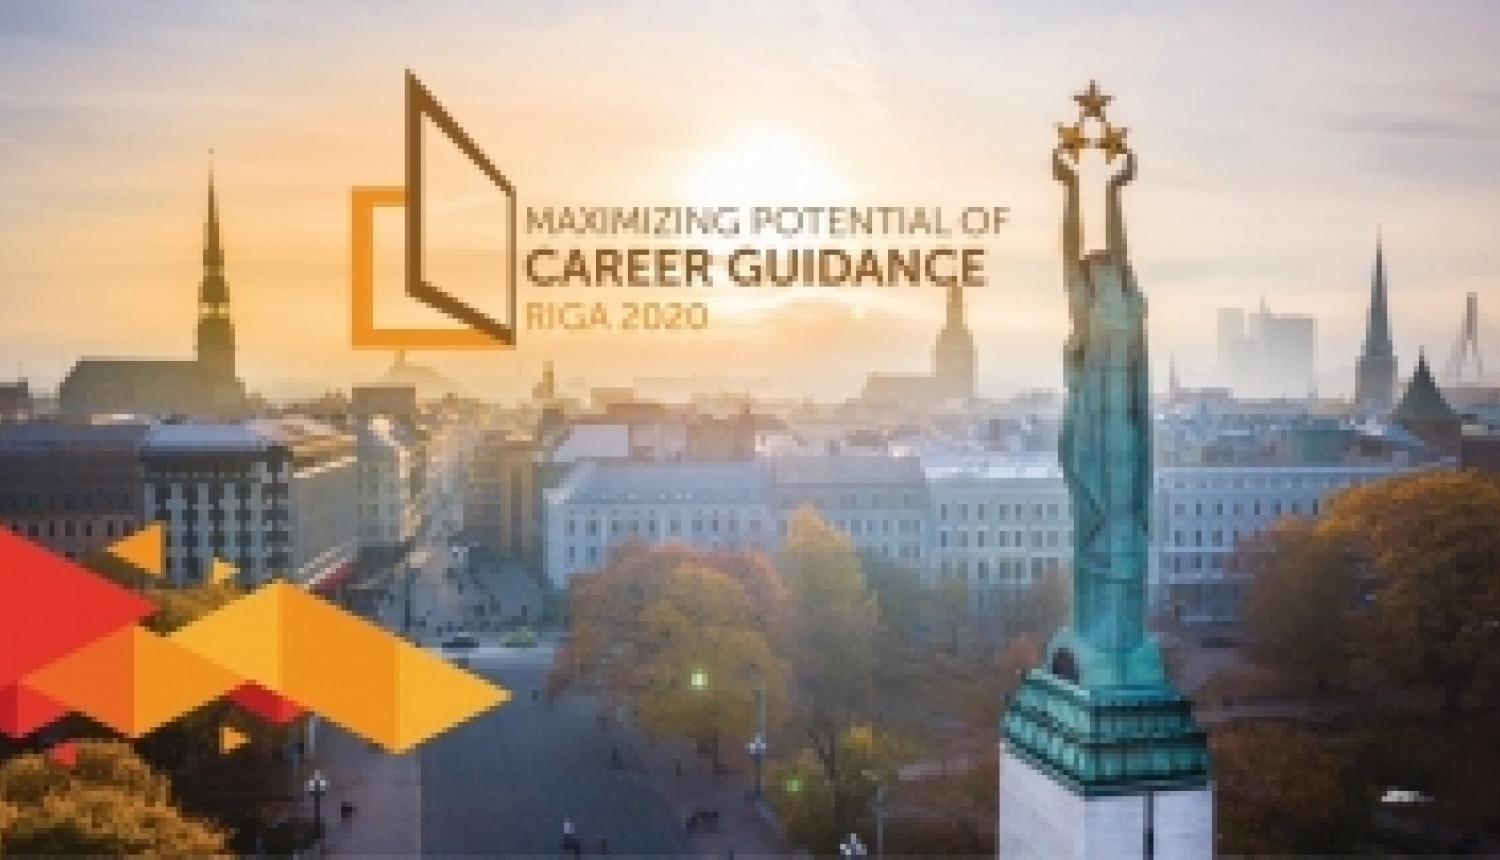 Registration open for the International Association for Educational and Vocational Guidance (IAEVG) Conference in Riga